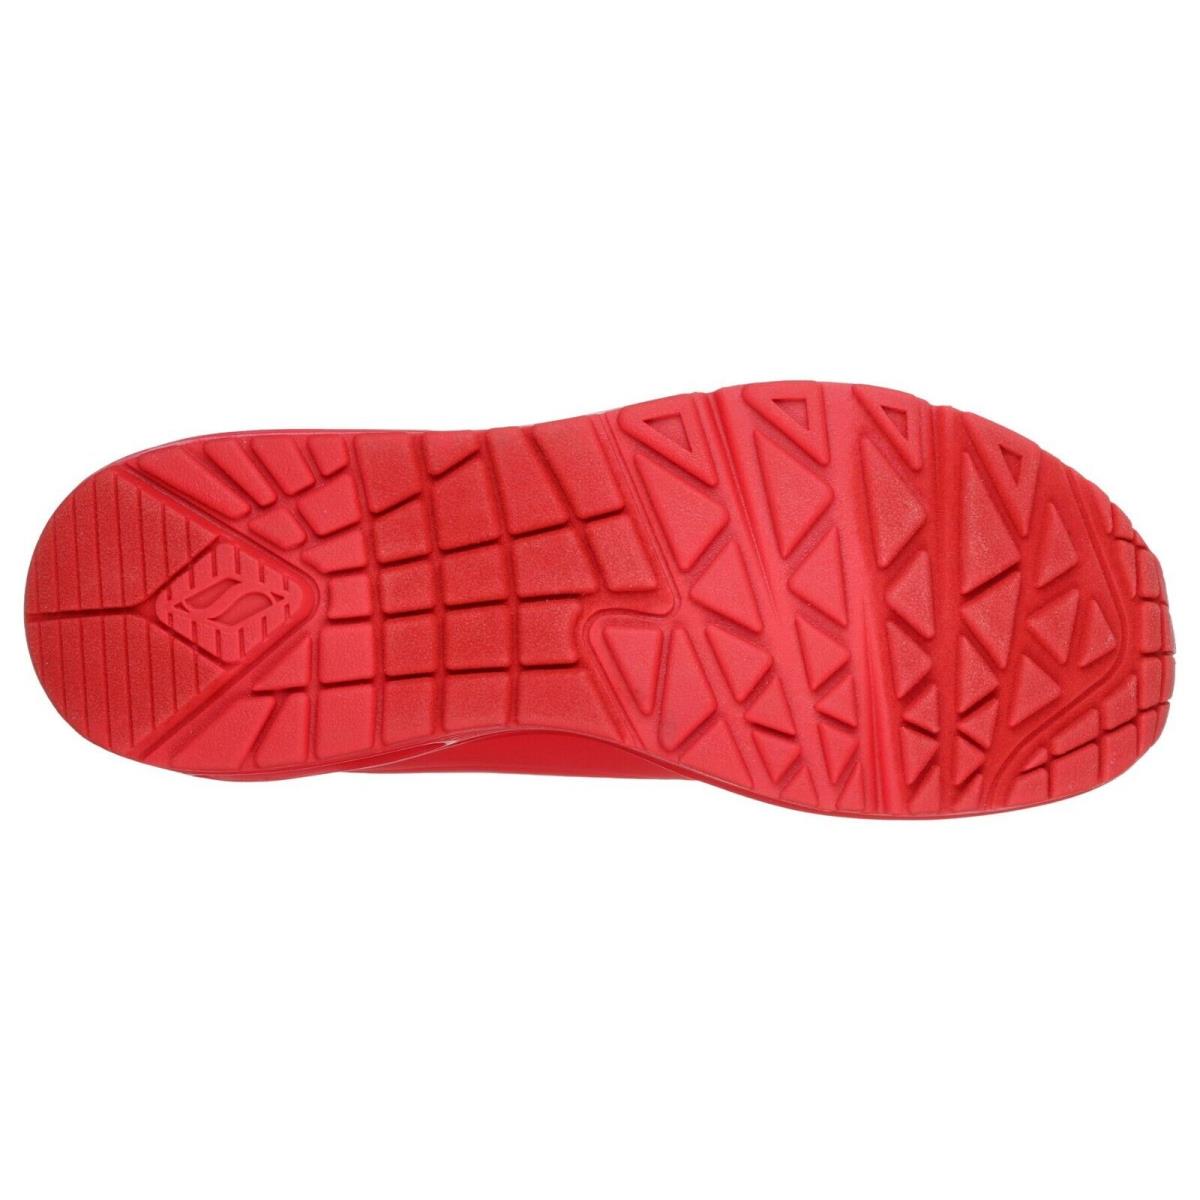 Skechers shoes  - Red 8